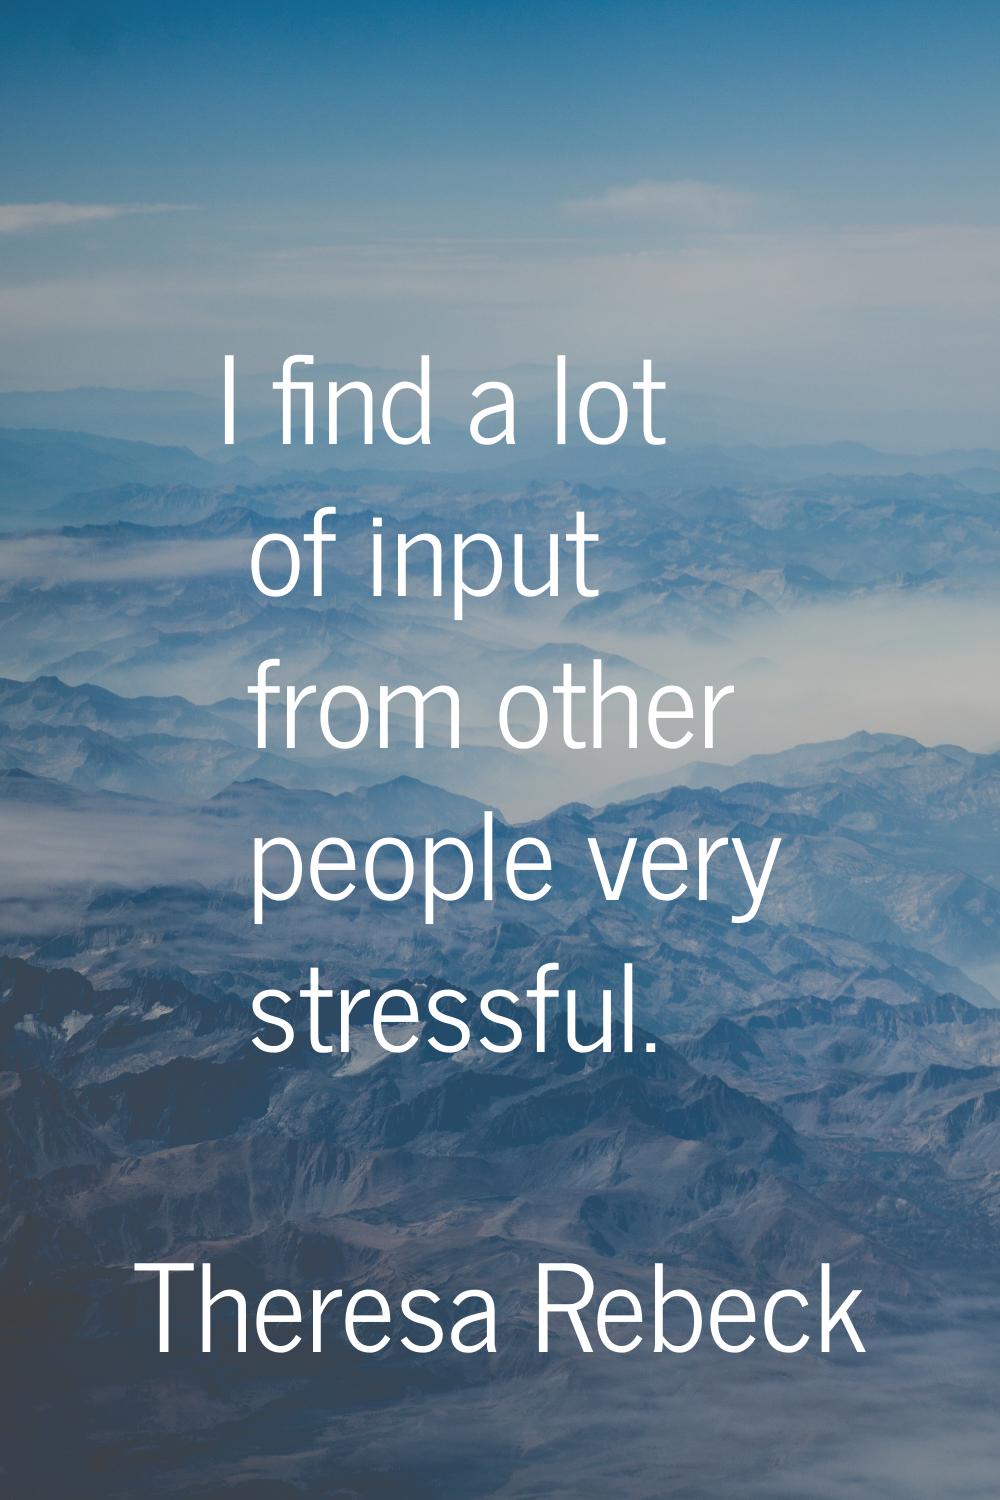 I find a lot of input from other people very stressful.